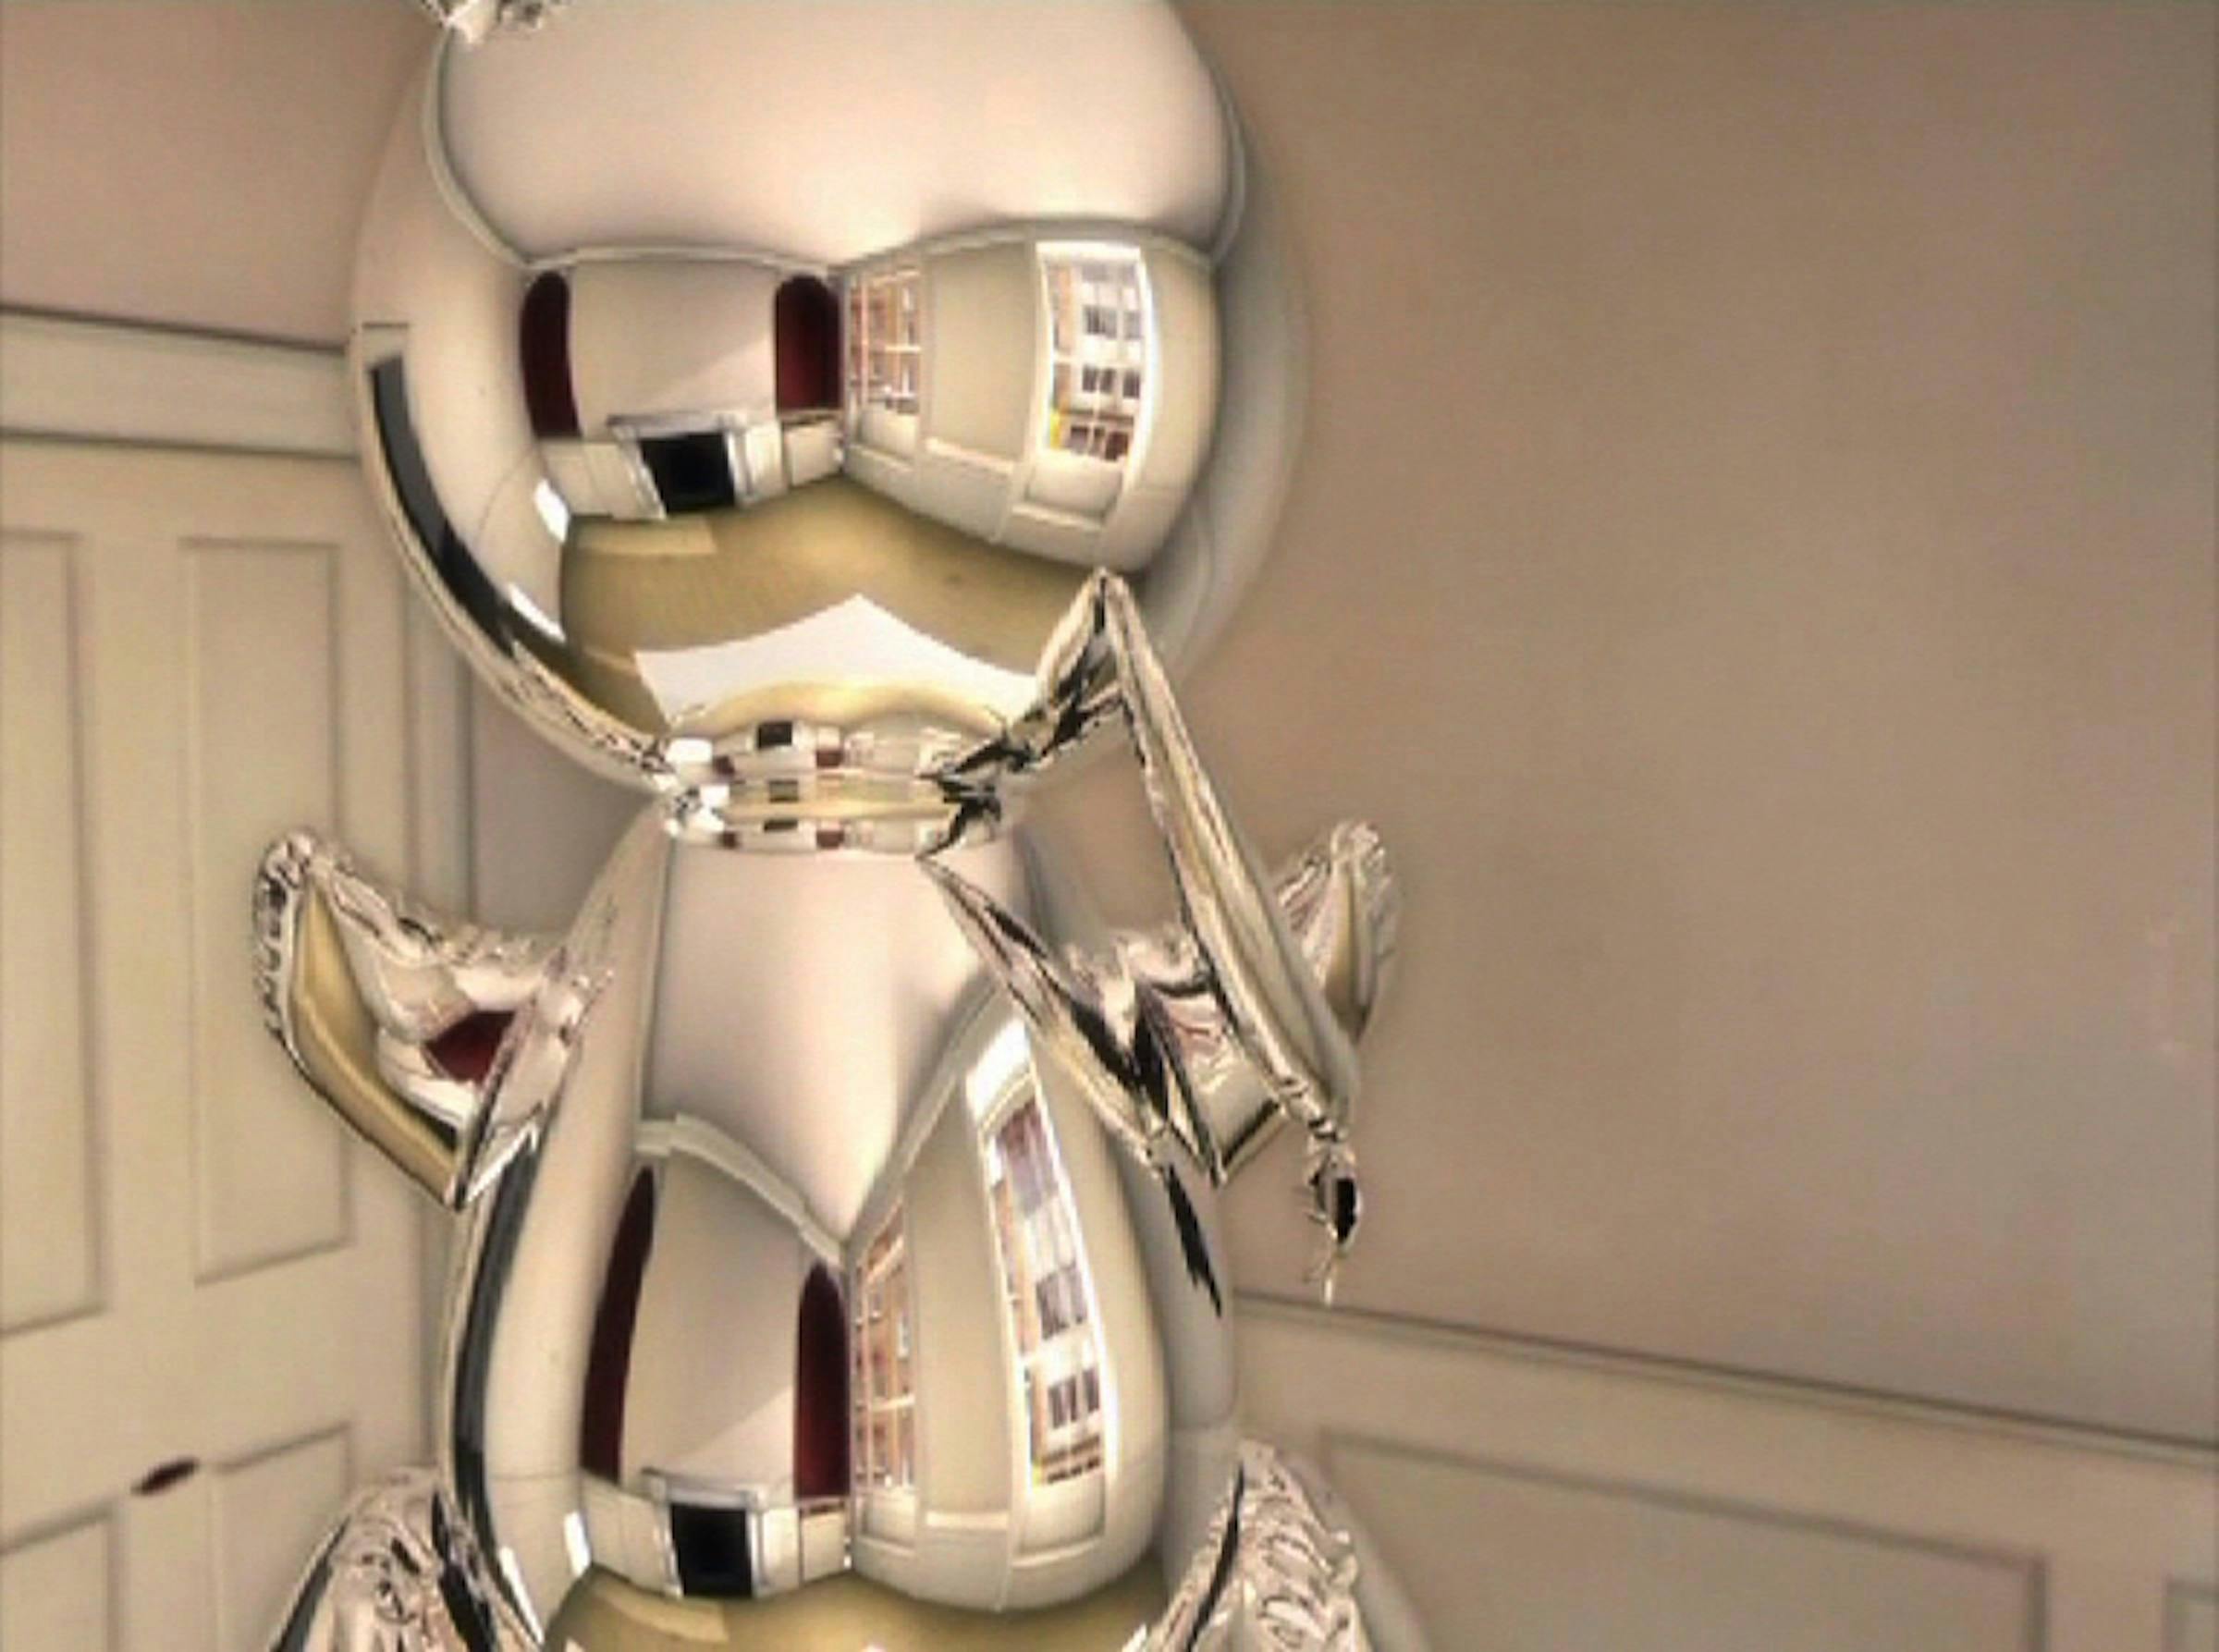 a digitally rendered image of a close up of a stainless steel Jeff Koons' rabbit on top of a plinth in a domestic room. You cannot see reflections of the camera in the stainless steel surface of the rabbit